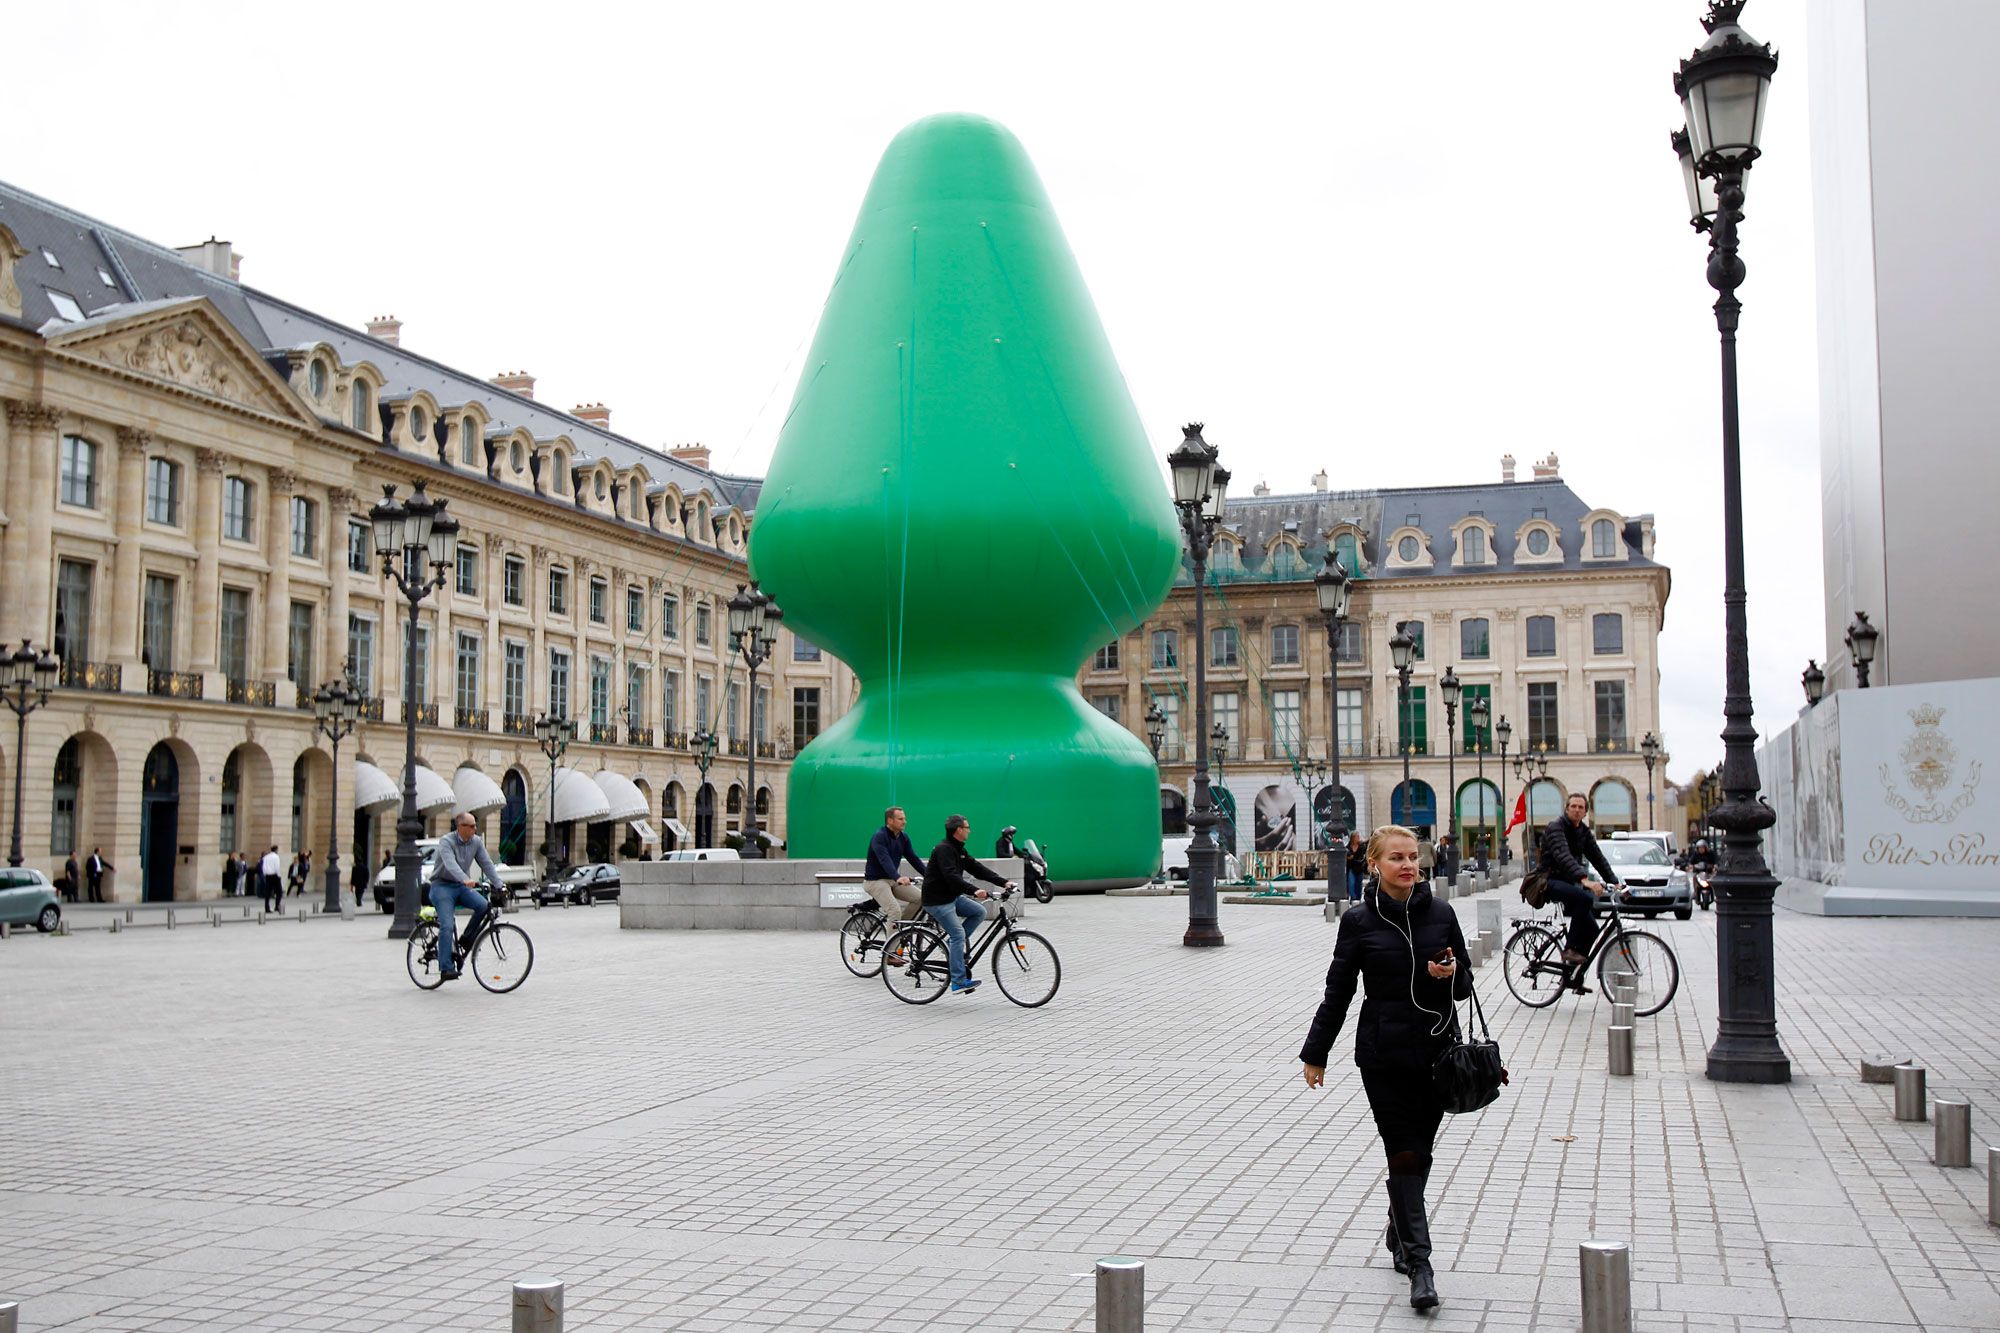 Best of Wearing buttplug in public